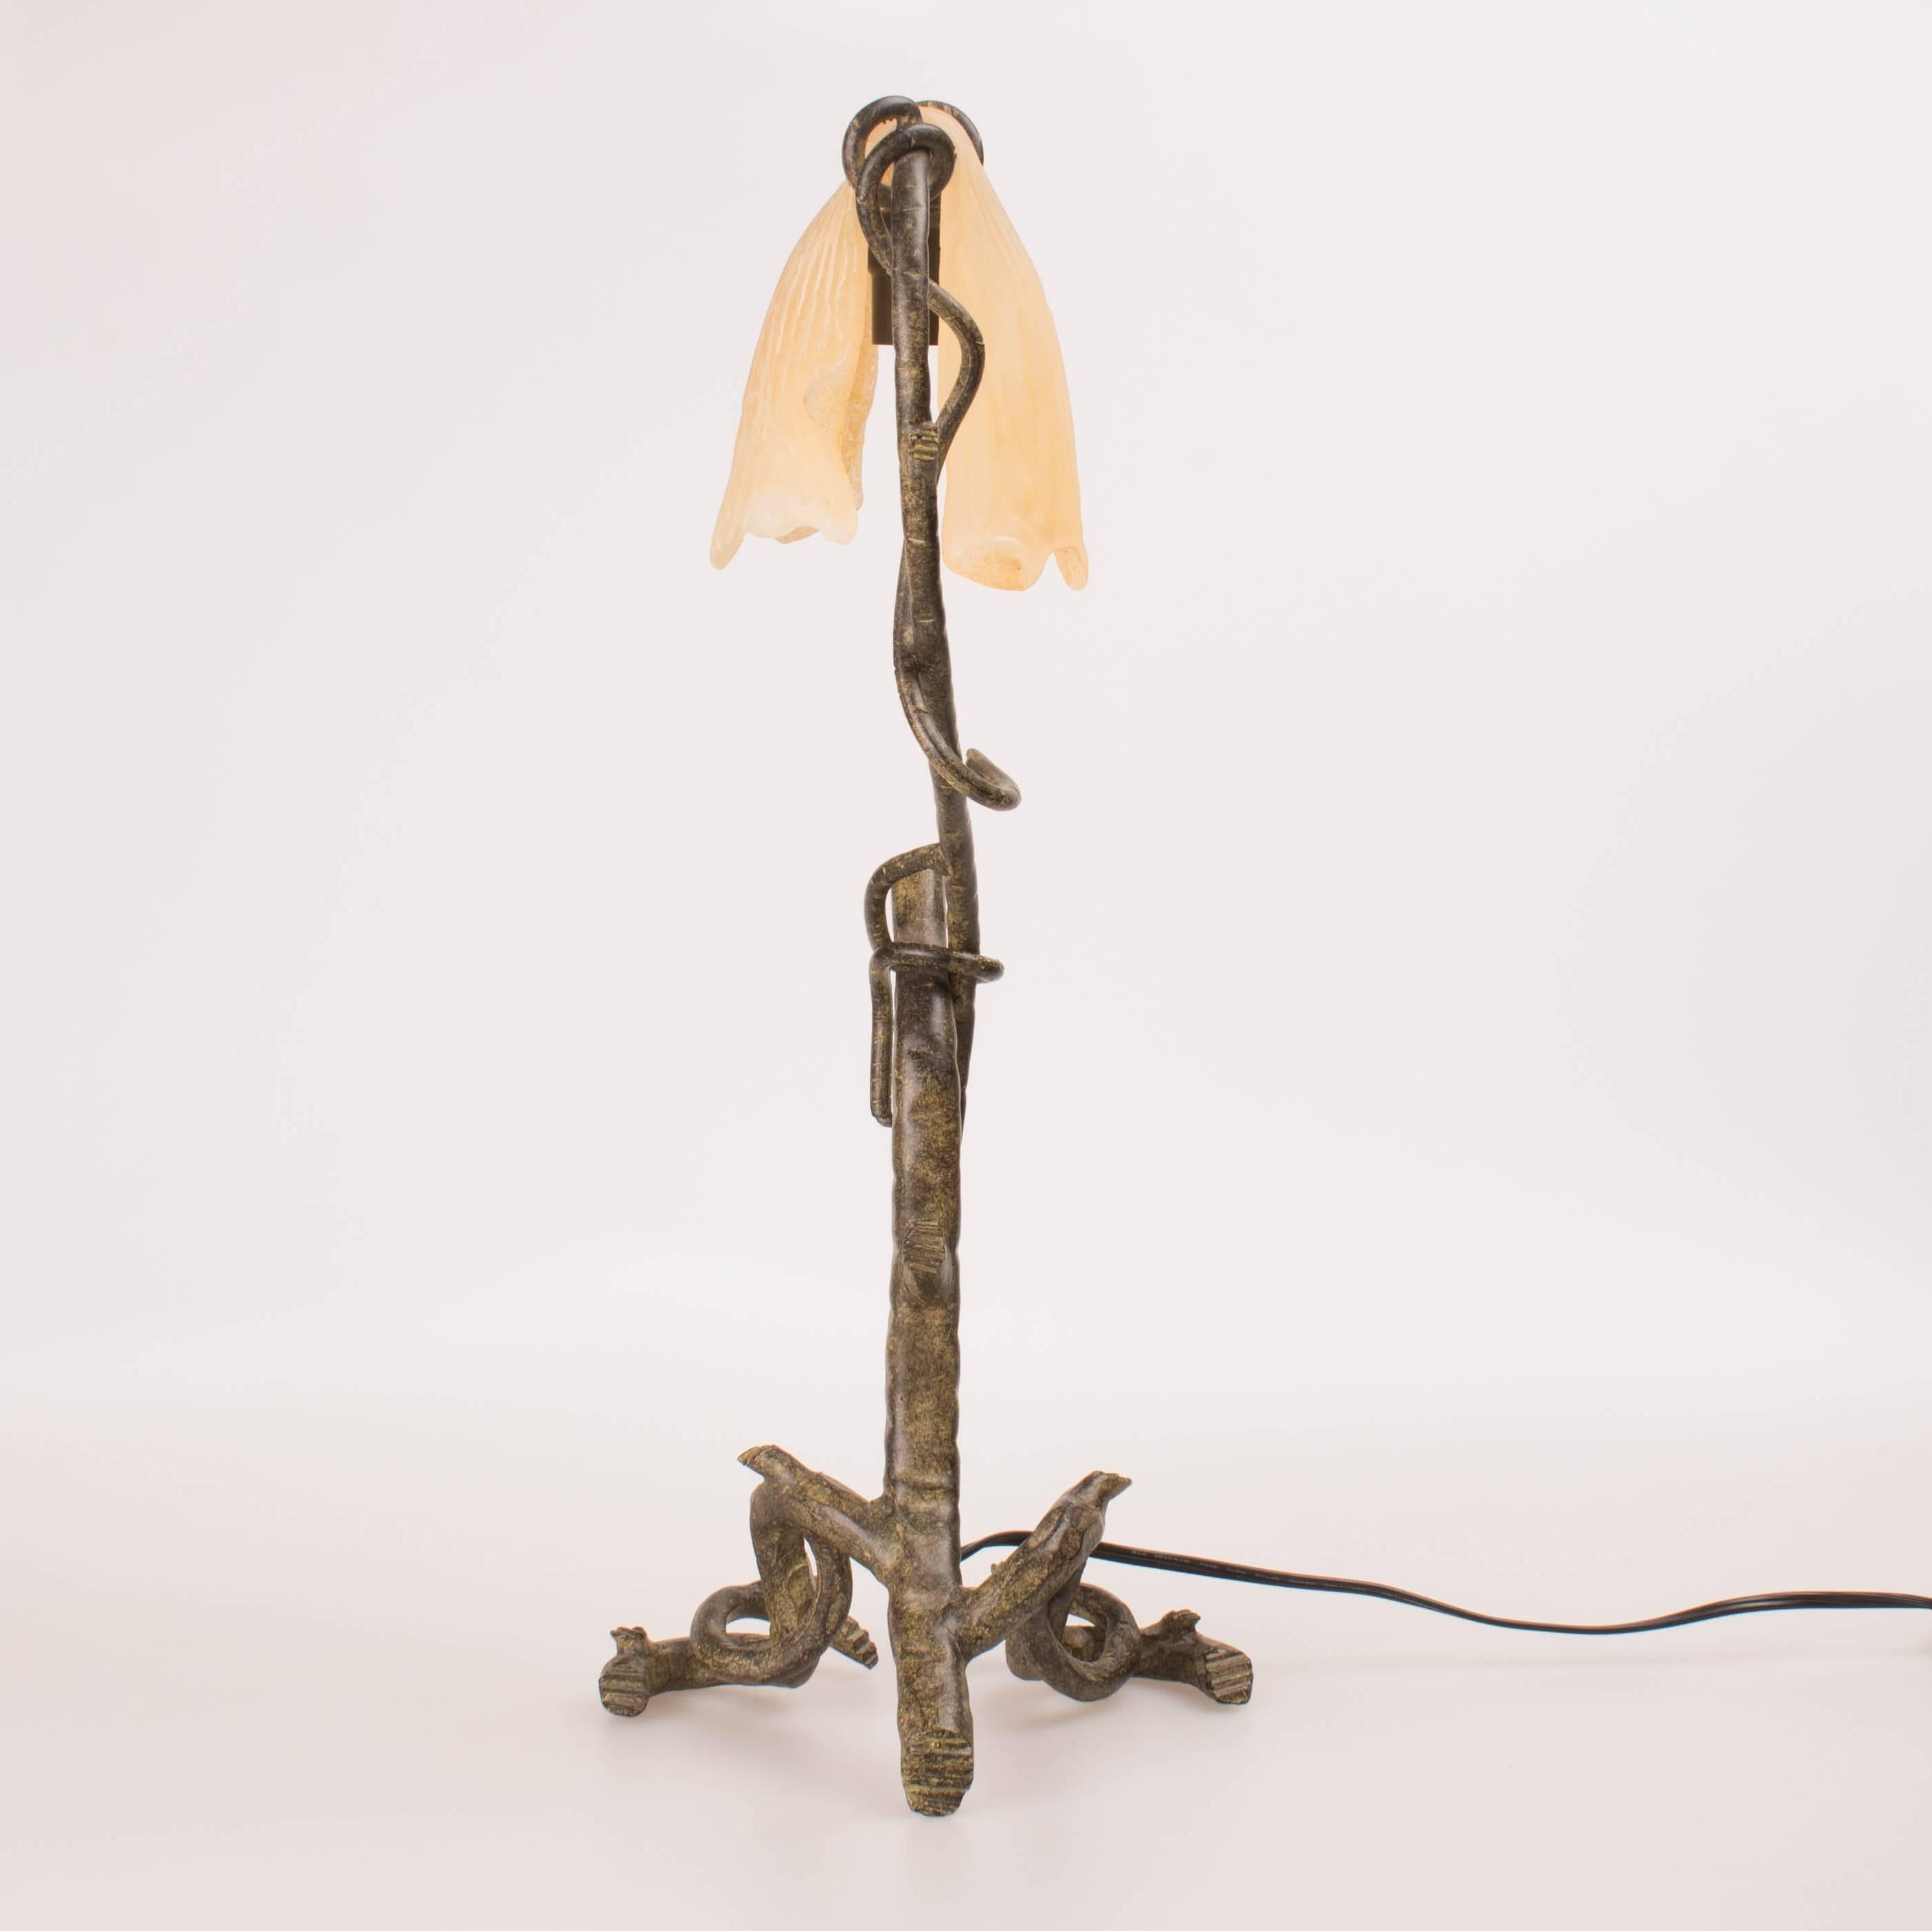 Late 20th century removable handkerchief table lamp made of Murano glass and bronze.